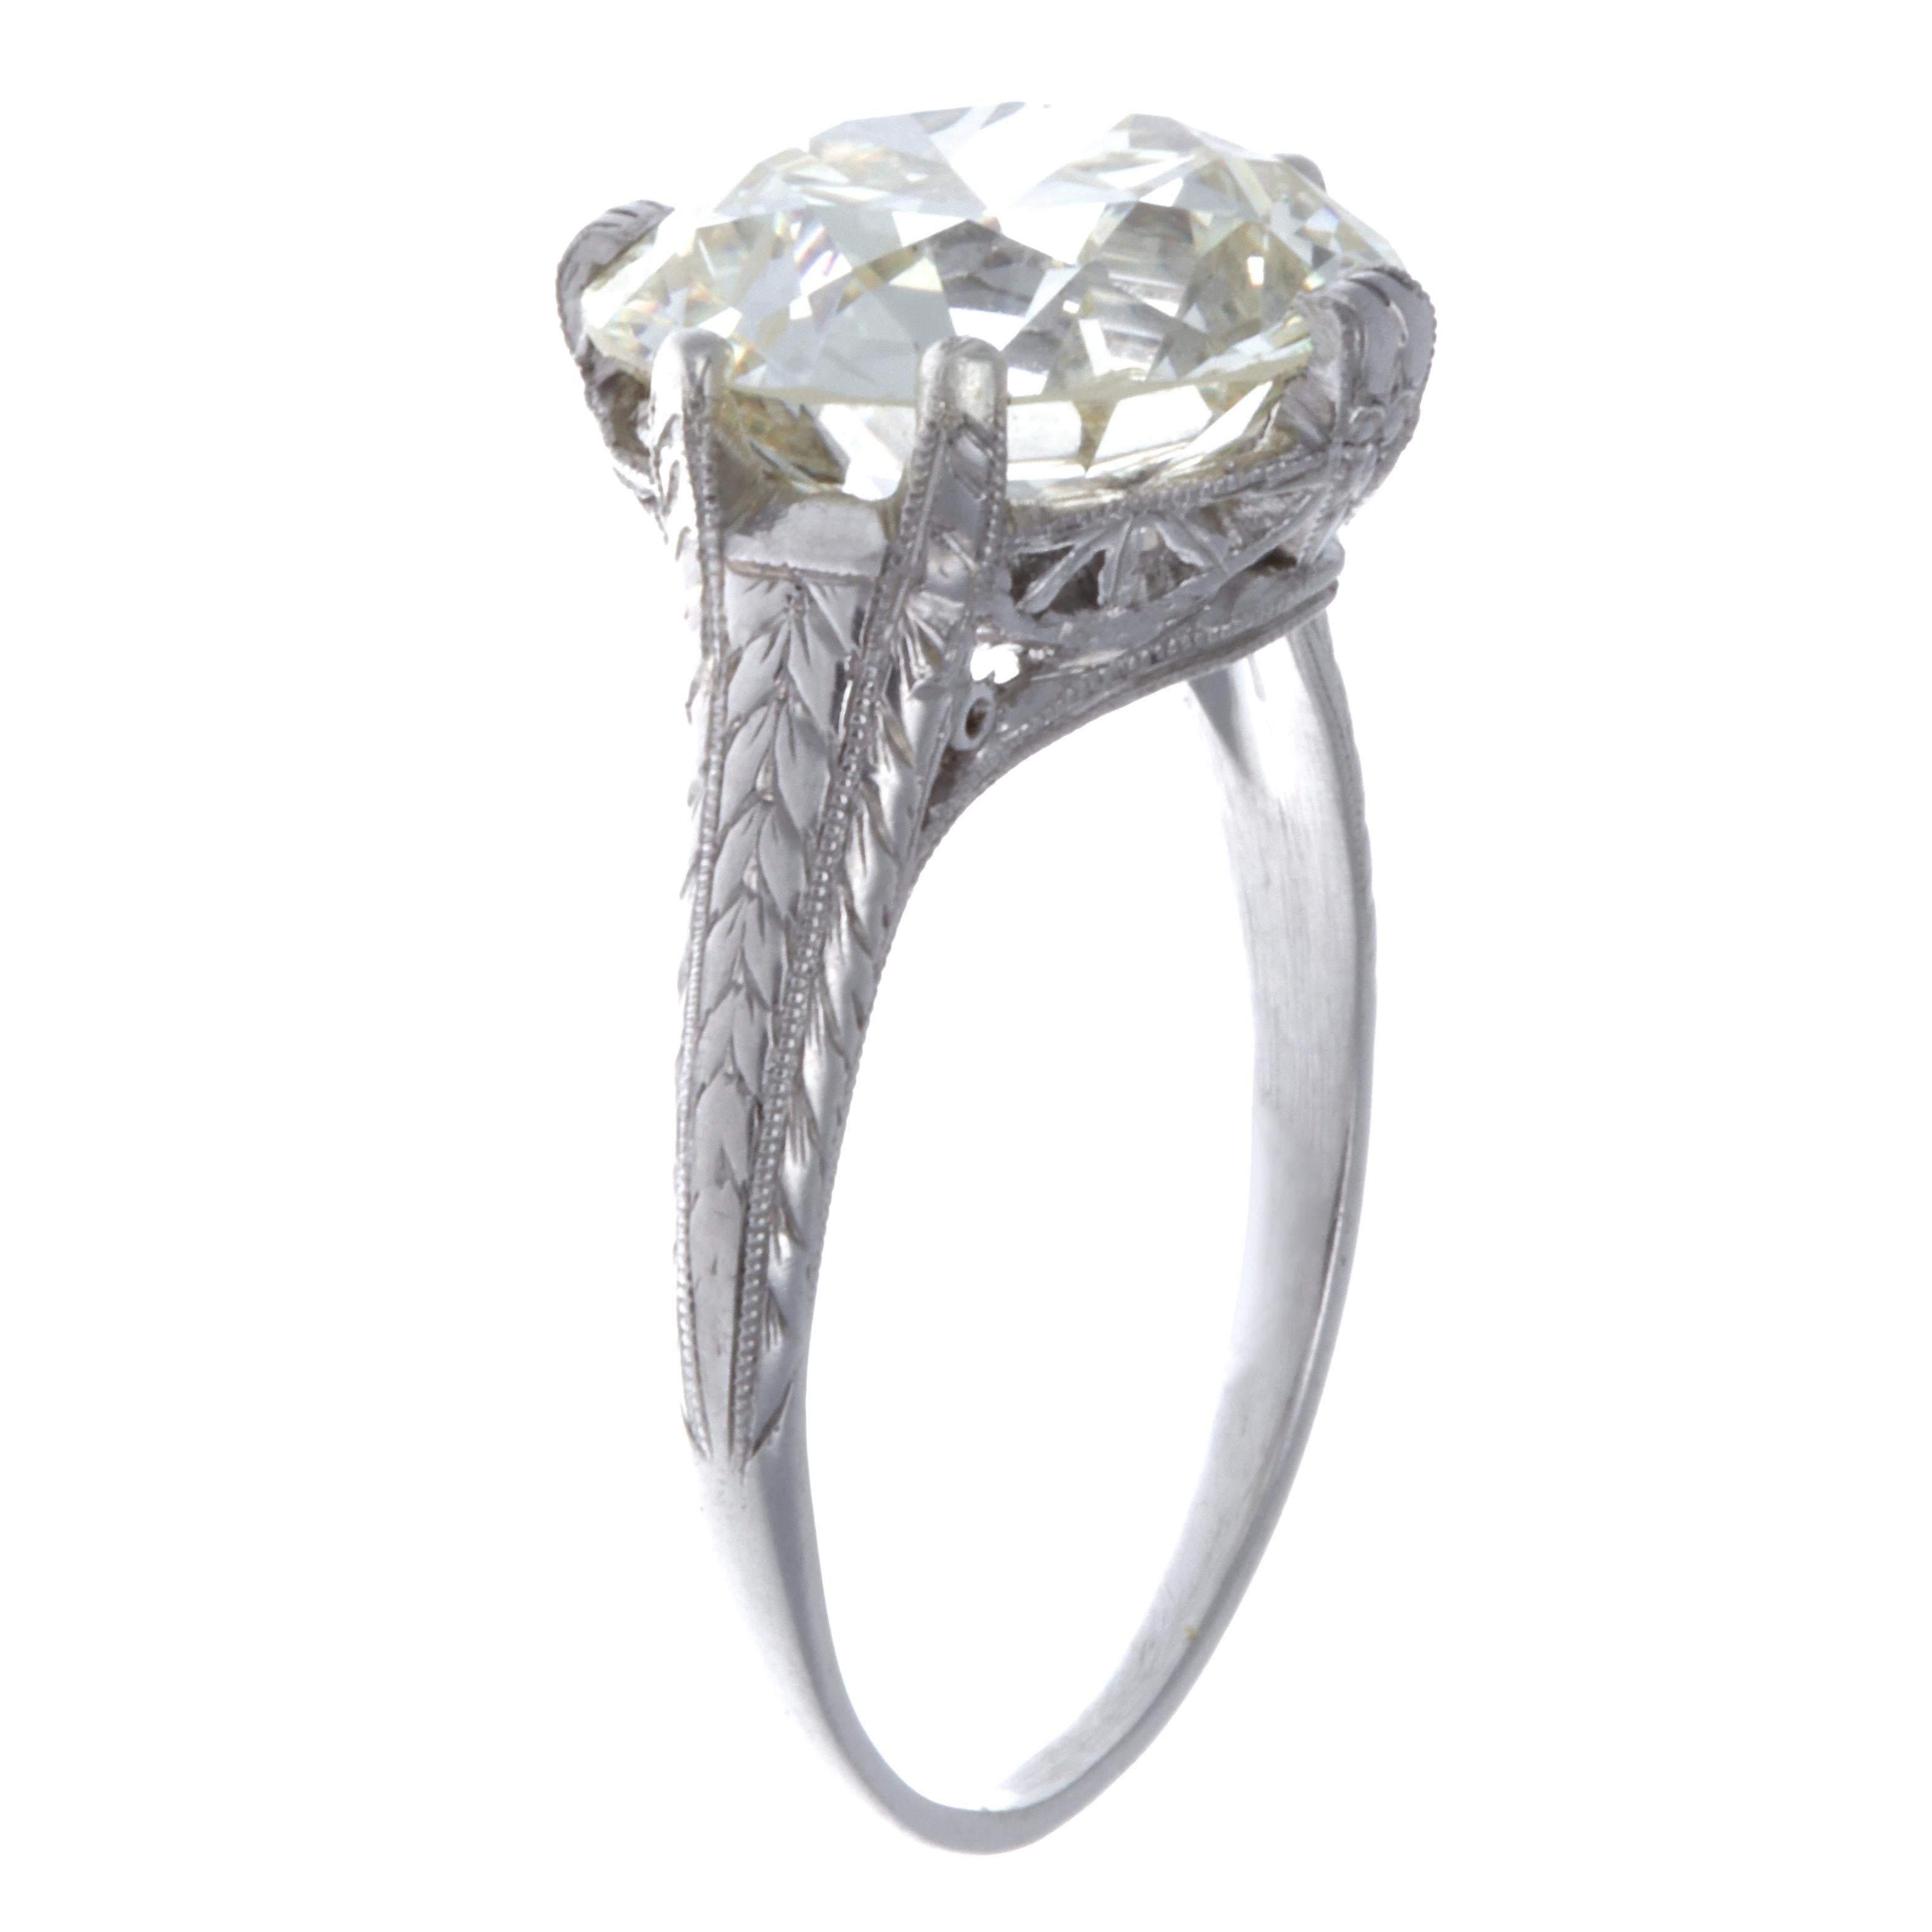 If diamond size is important for you, this Art Deco platinum diamond engagement ring offers the highest value for a reasonable price. The striking diamond is highlighted by the use of minimal prongs, and the stunning thin Art Deco filigree band